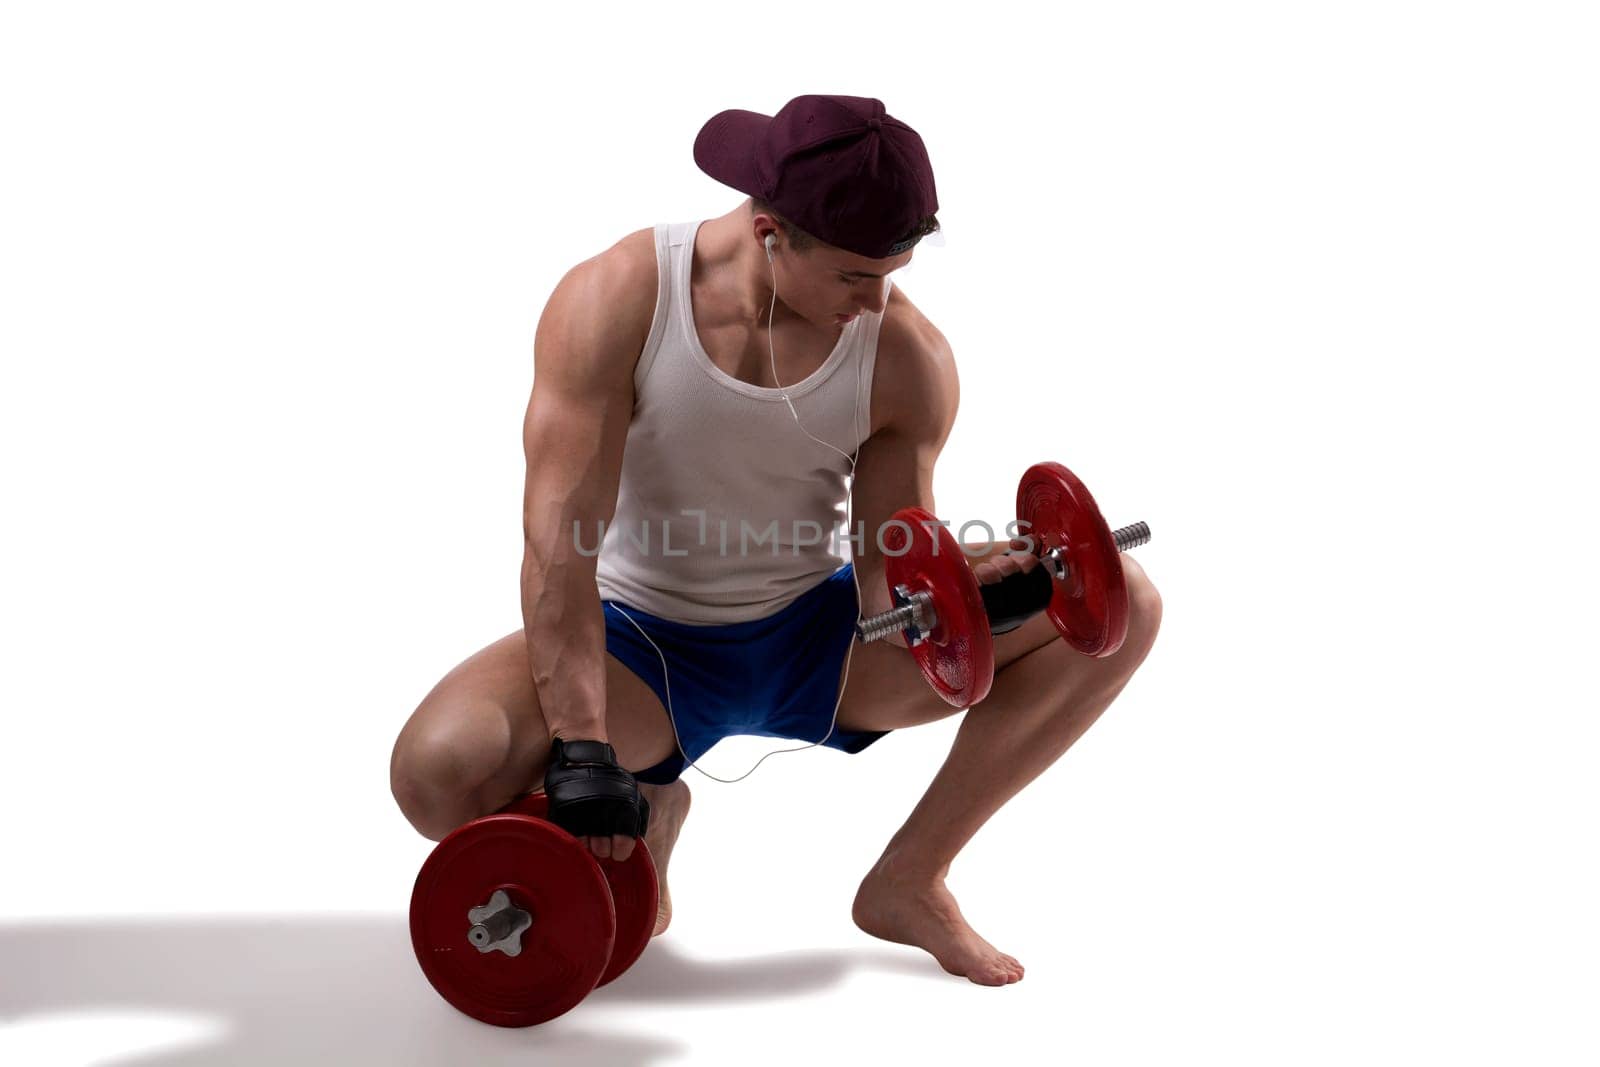 Handsome muscular young man holding dumbbells, isolated on white, full length shot, wearing tank-top